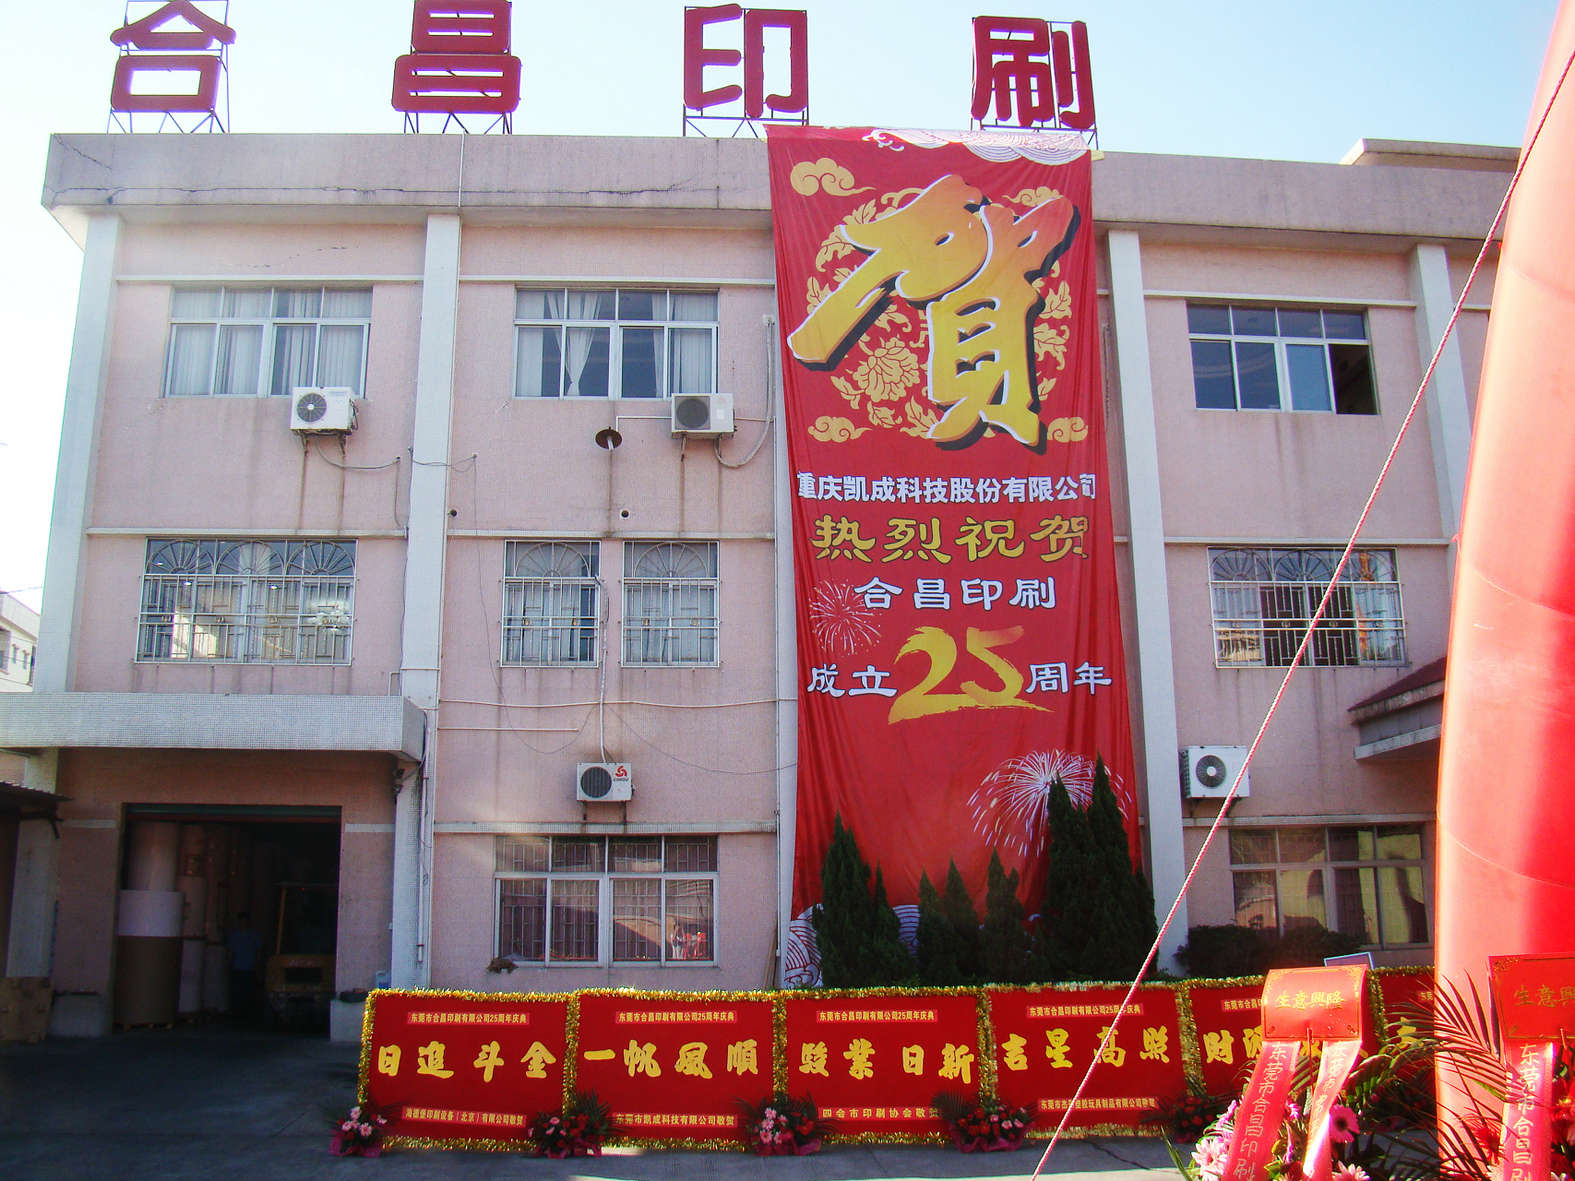 Warm congratulations to the 25th anniversary of Dongguan Hechang Printing Co., Ltd.!